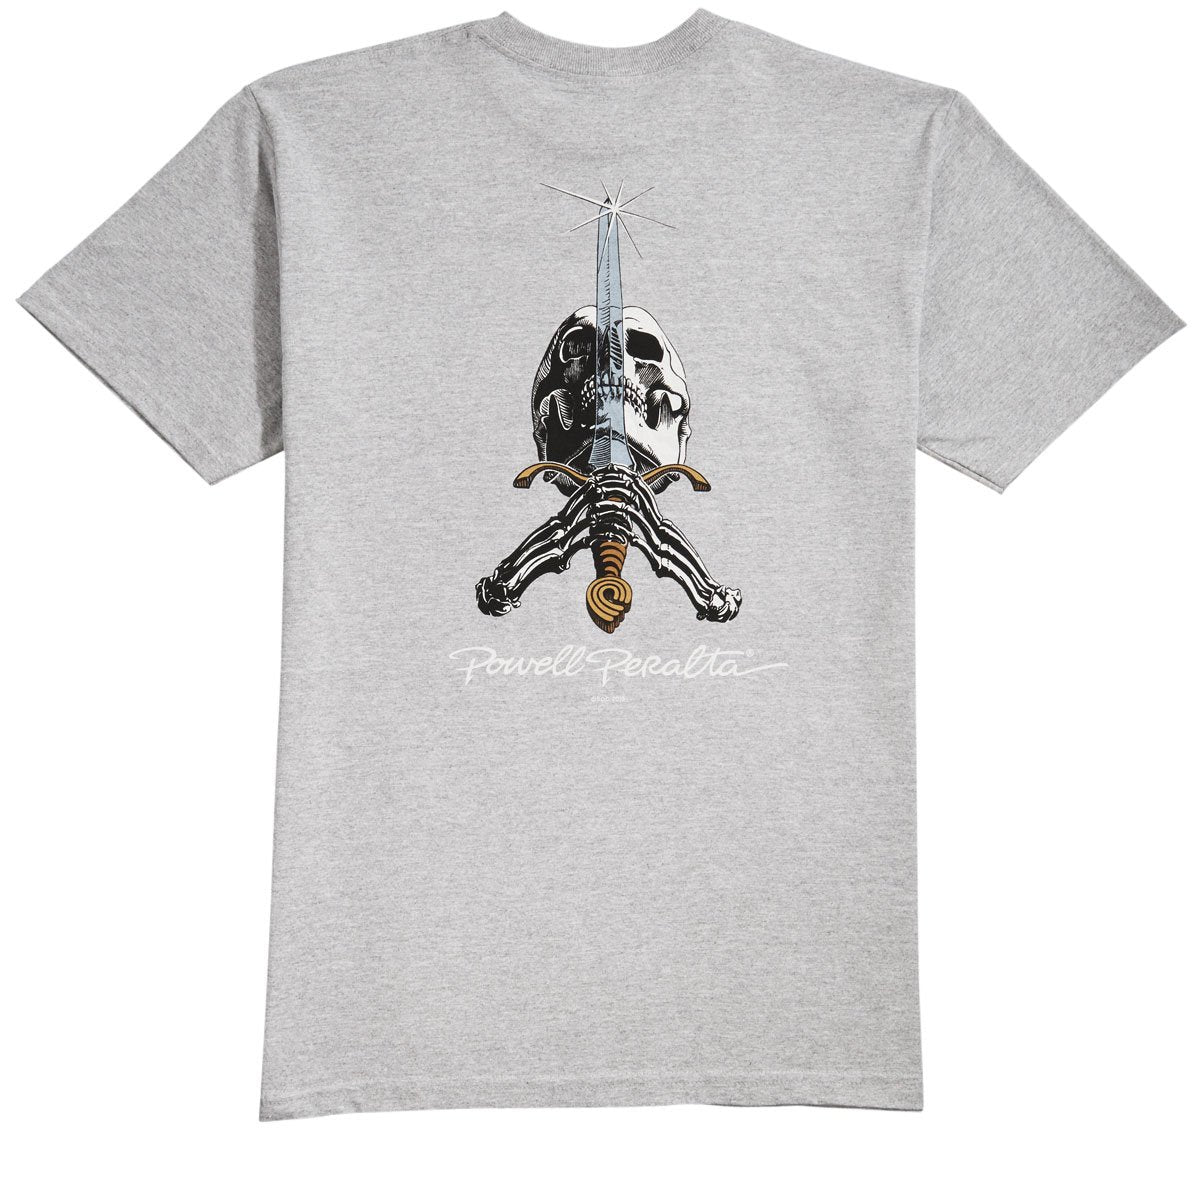 Powell-Peralta Skull and Sword T-Shirt - Athletic Heather image 1